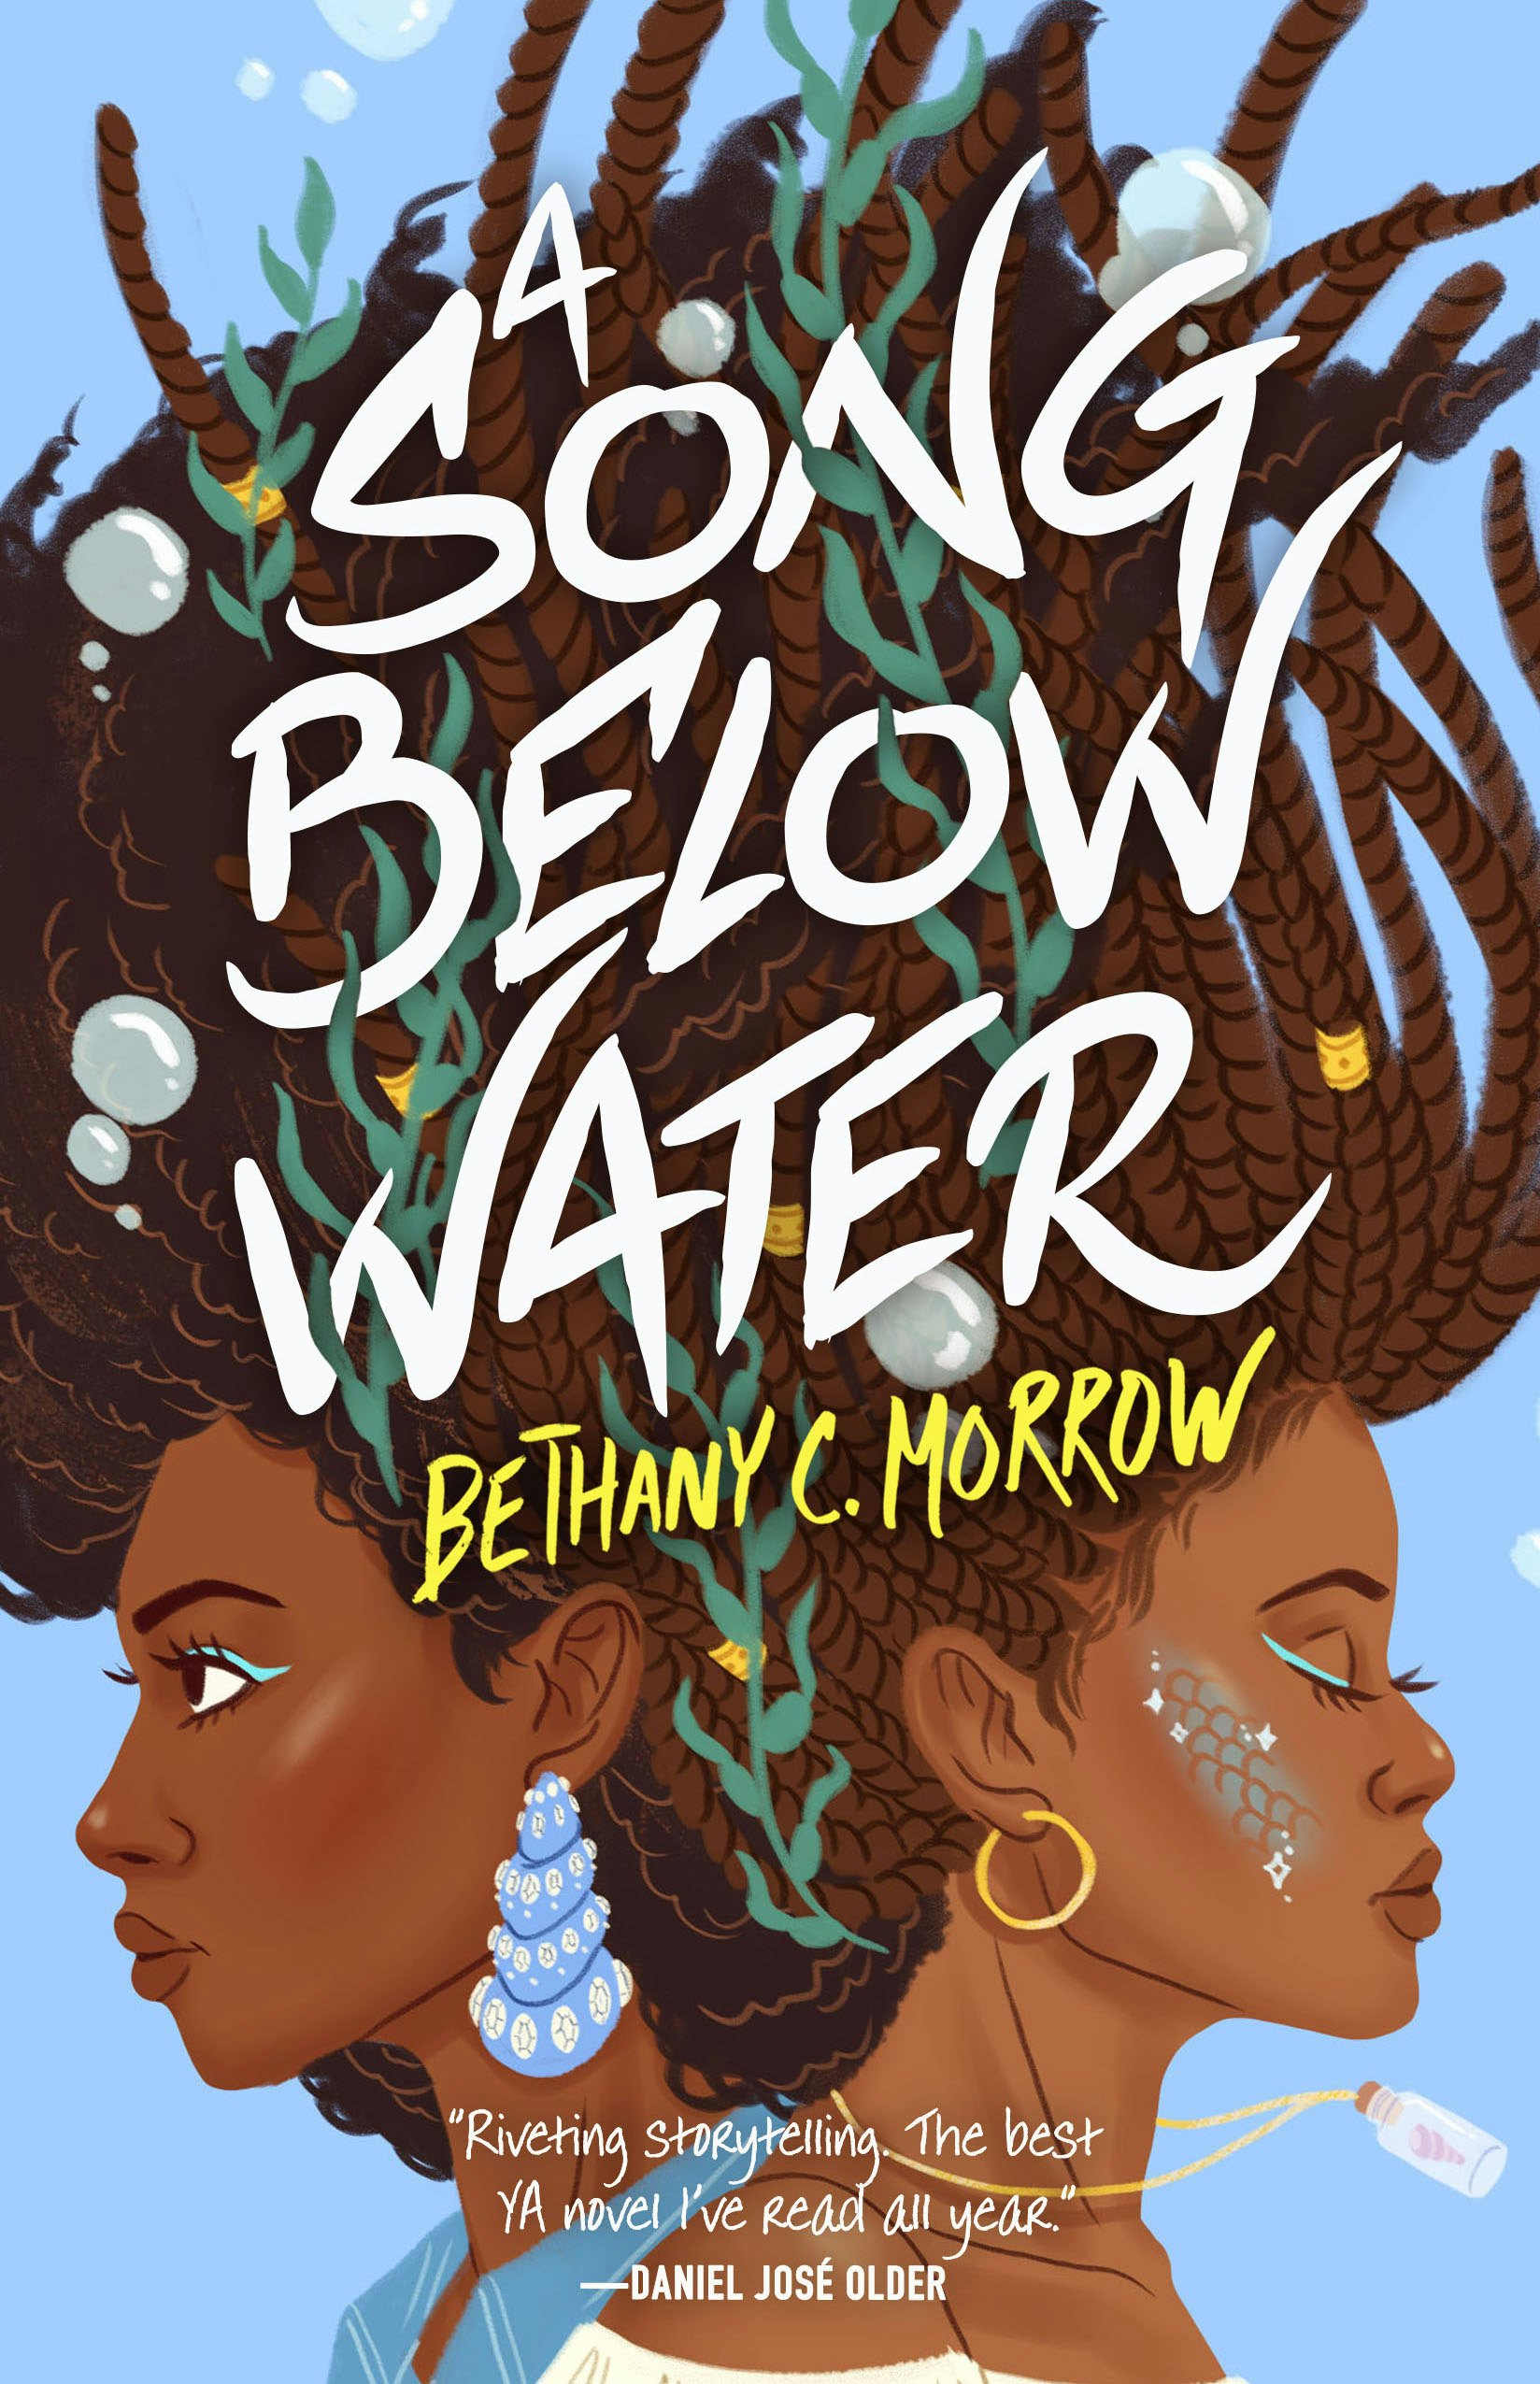 a song below water by bethany c morrow